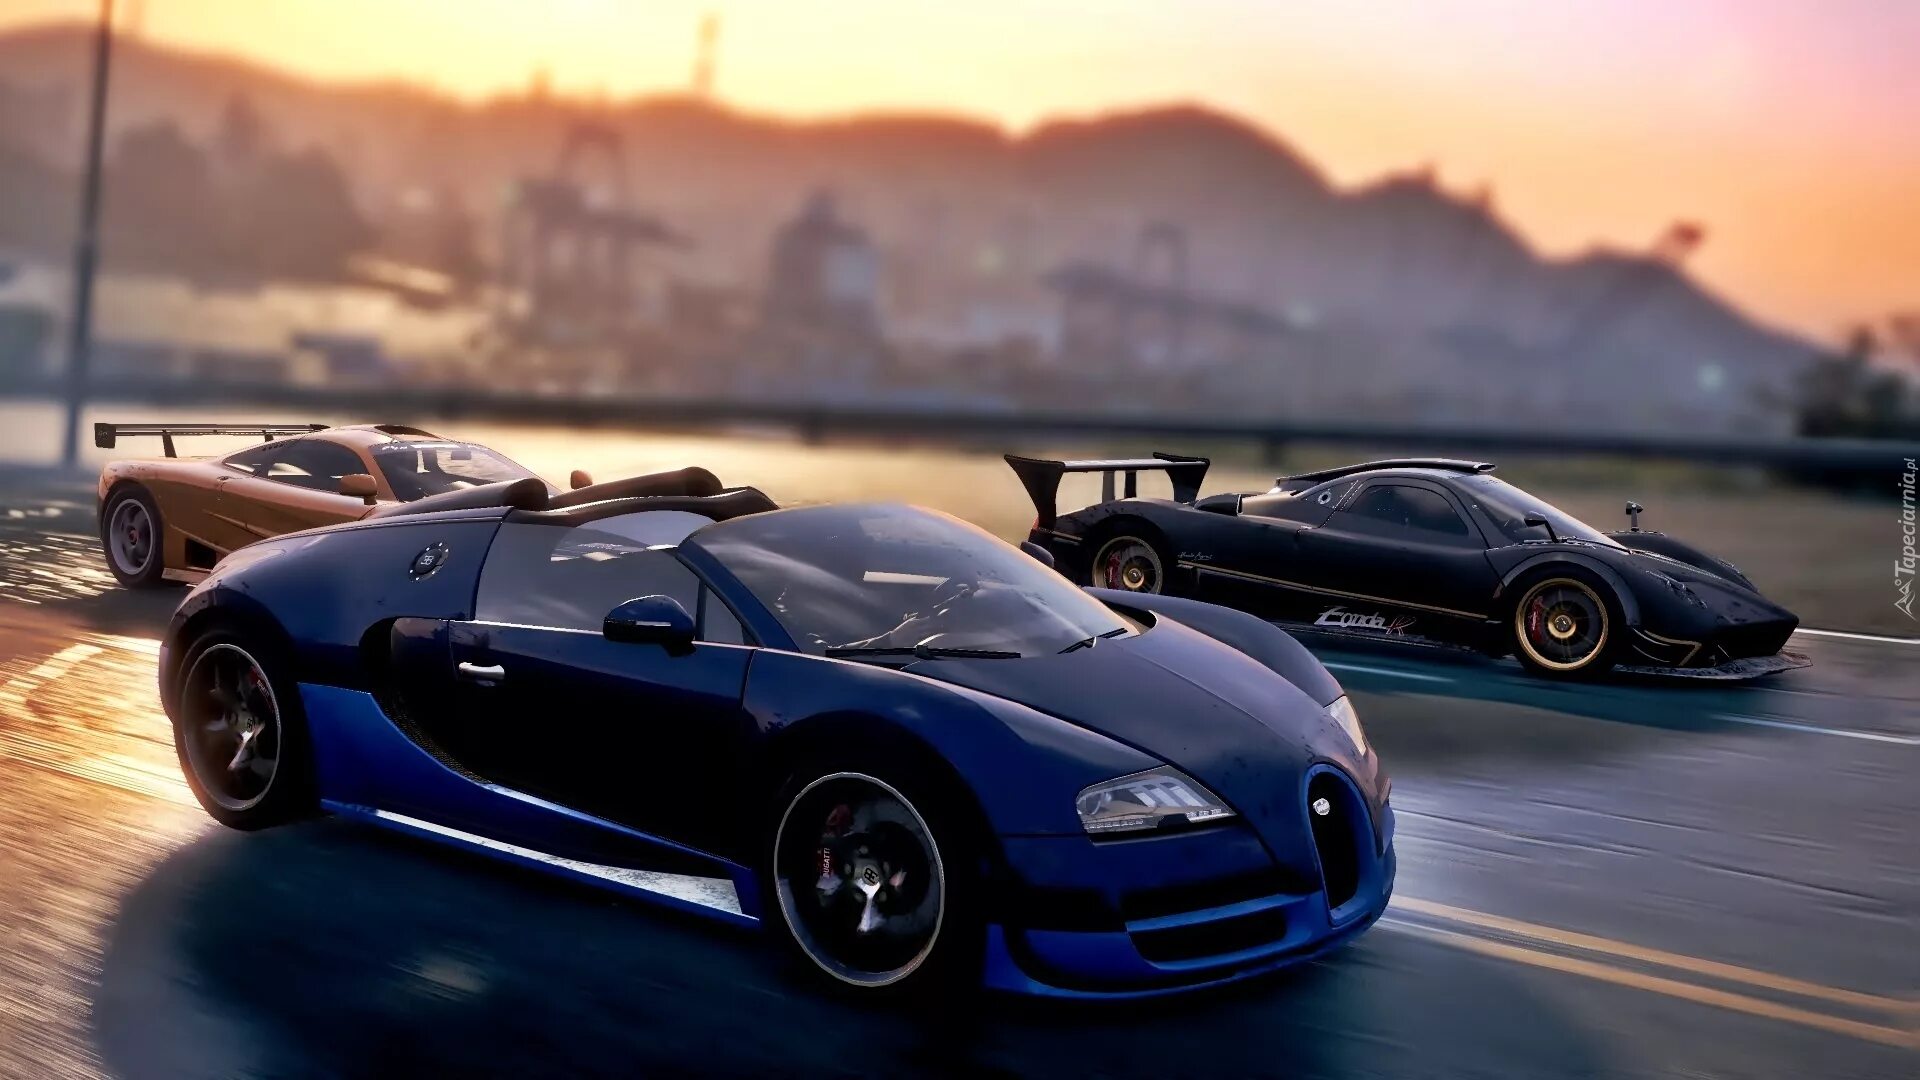 Nfs mw 2. Бугатти Вейрон в most wanted 2012. Макларен NFS most wanted 2012. Bugatti Veyron Vitesse most wanted 2012. Need for Speed most wanted Бугатти.